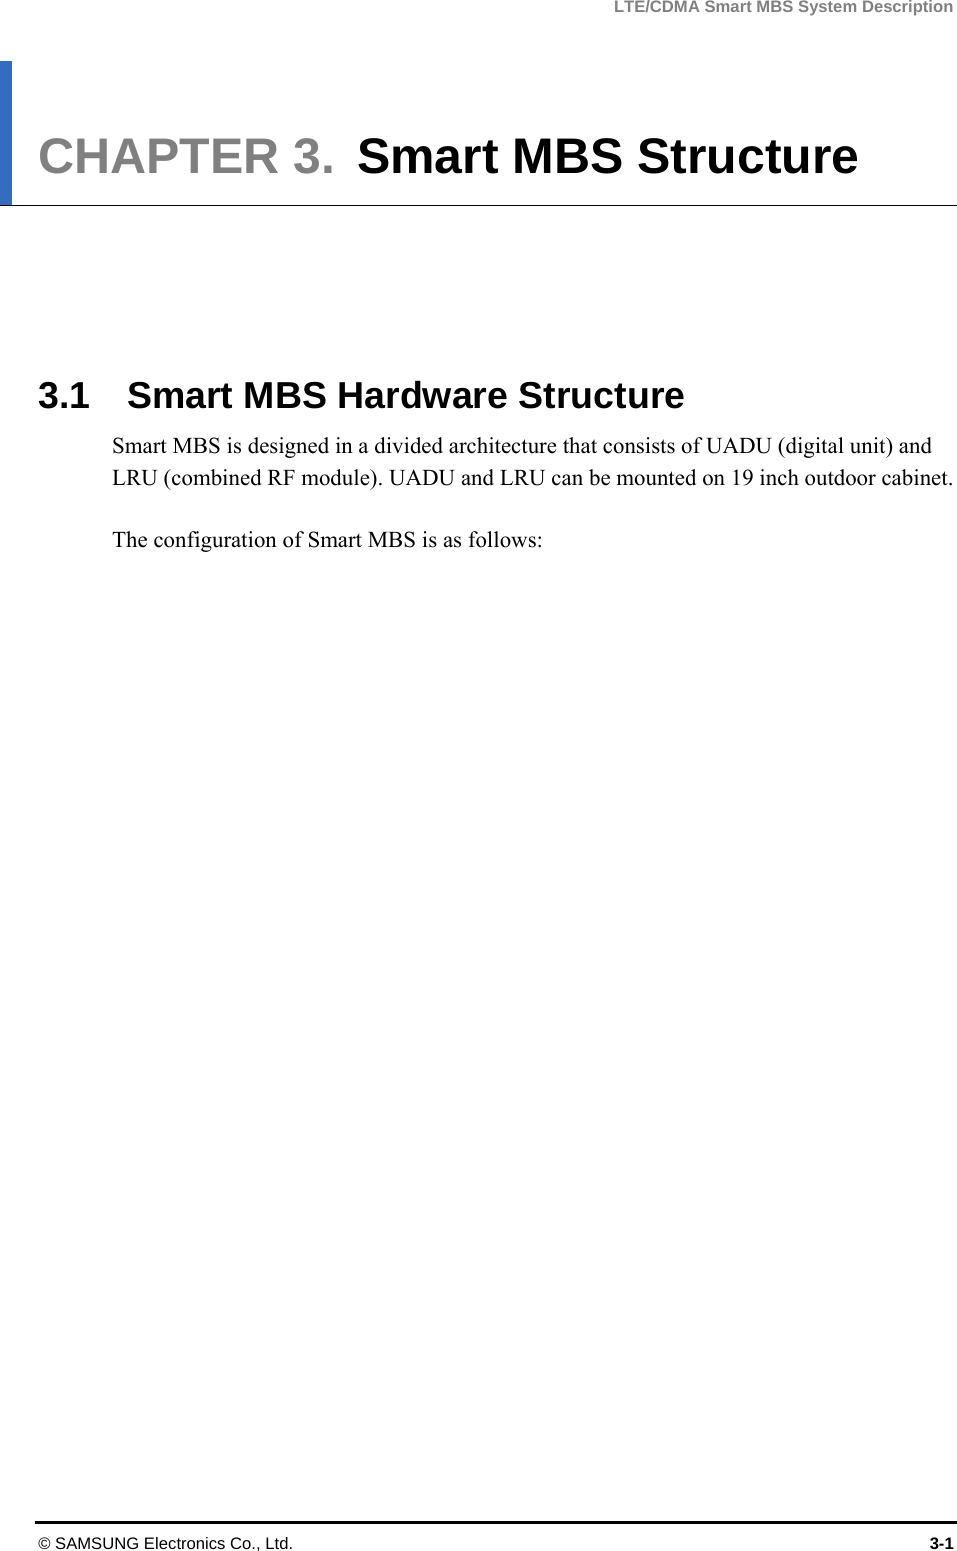 LTE/CDMA Smart MBS System Description © SAMSUNG Electronics Co., Ltd.  3-1 CHAPTER 3.  Smart MBS Structure      3.1    Smart MBS Hardware Structure Smart MBS is designed in a divided architecture that consists of UADU (digital unit) and LRU (combined RF module). UADU and LRU can be mounted on 19 inch outdoor cabinet.  The configuration of Smart MBS is as follows:   